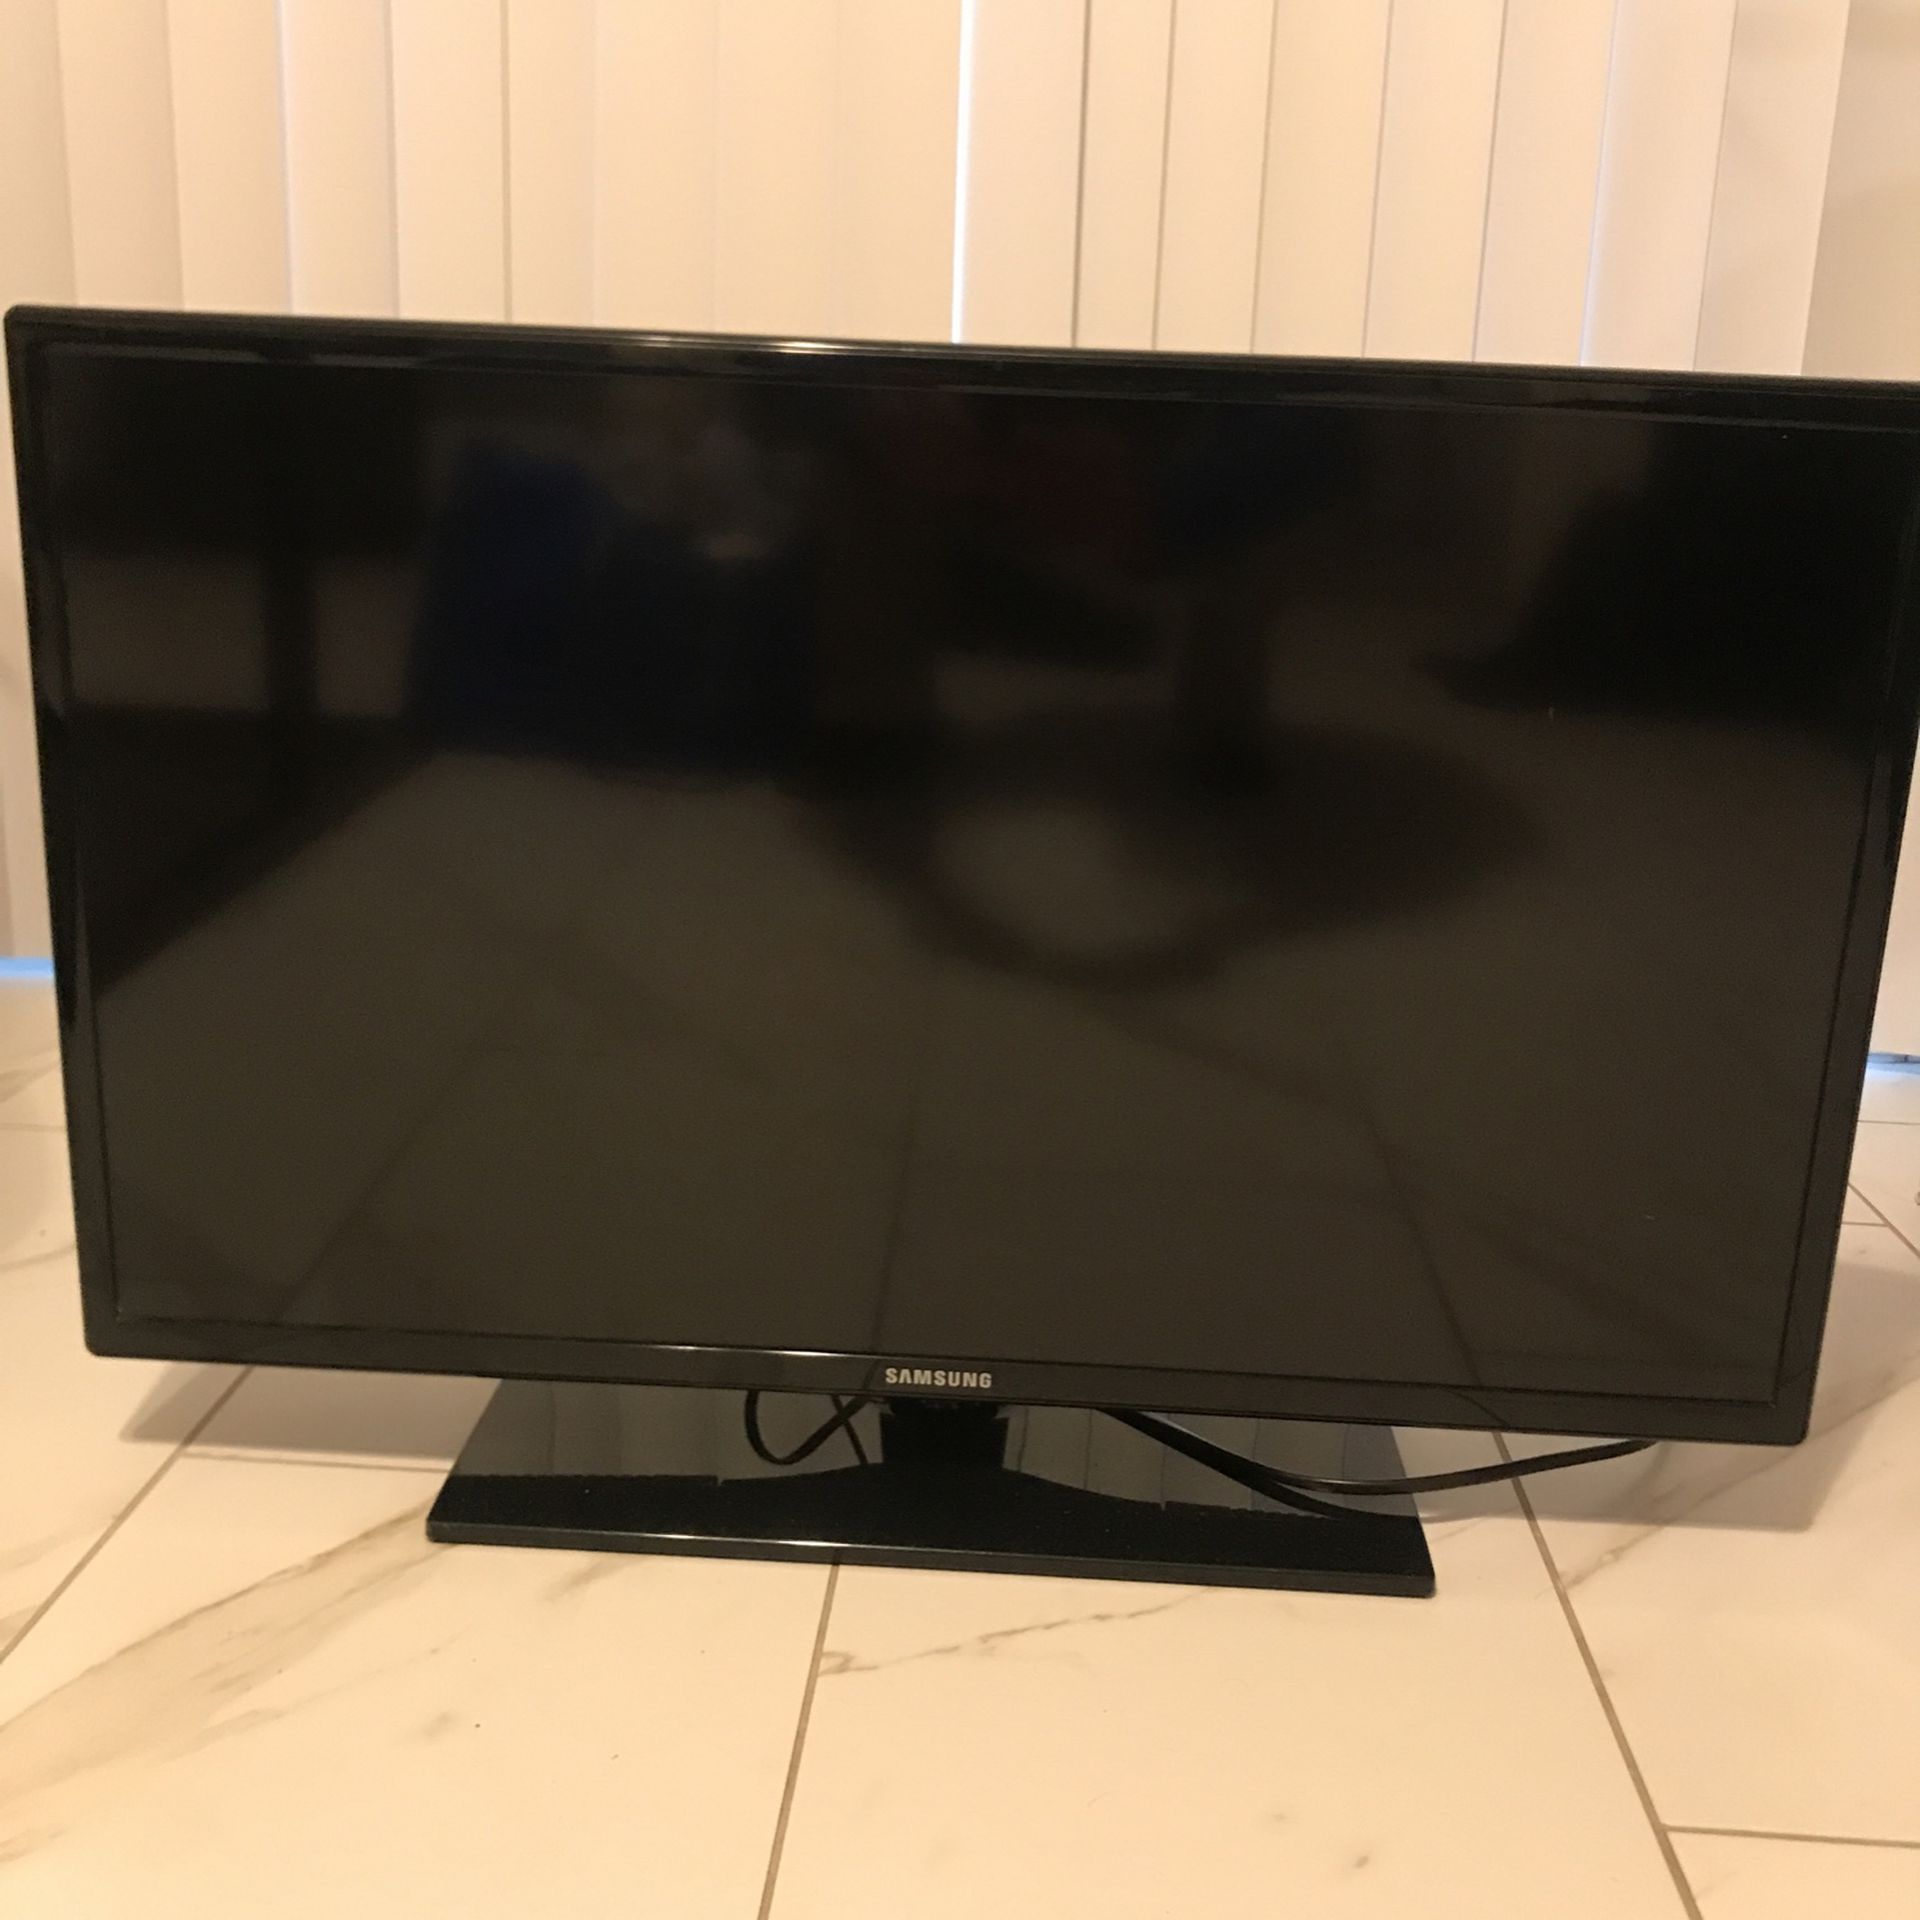 TV Samsung. 33 inches. Remote included. 